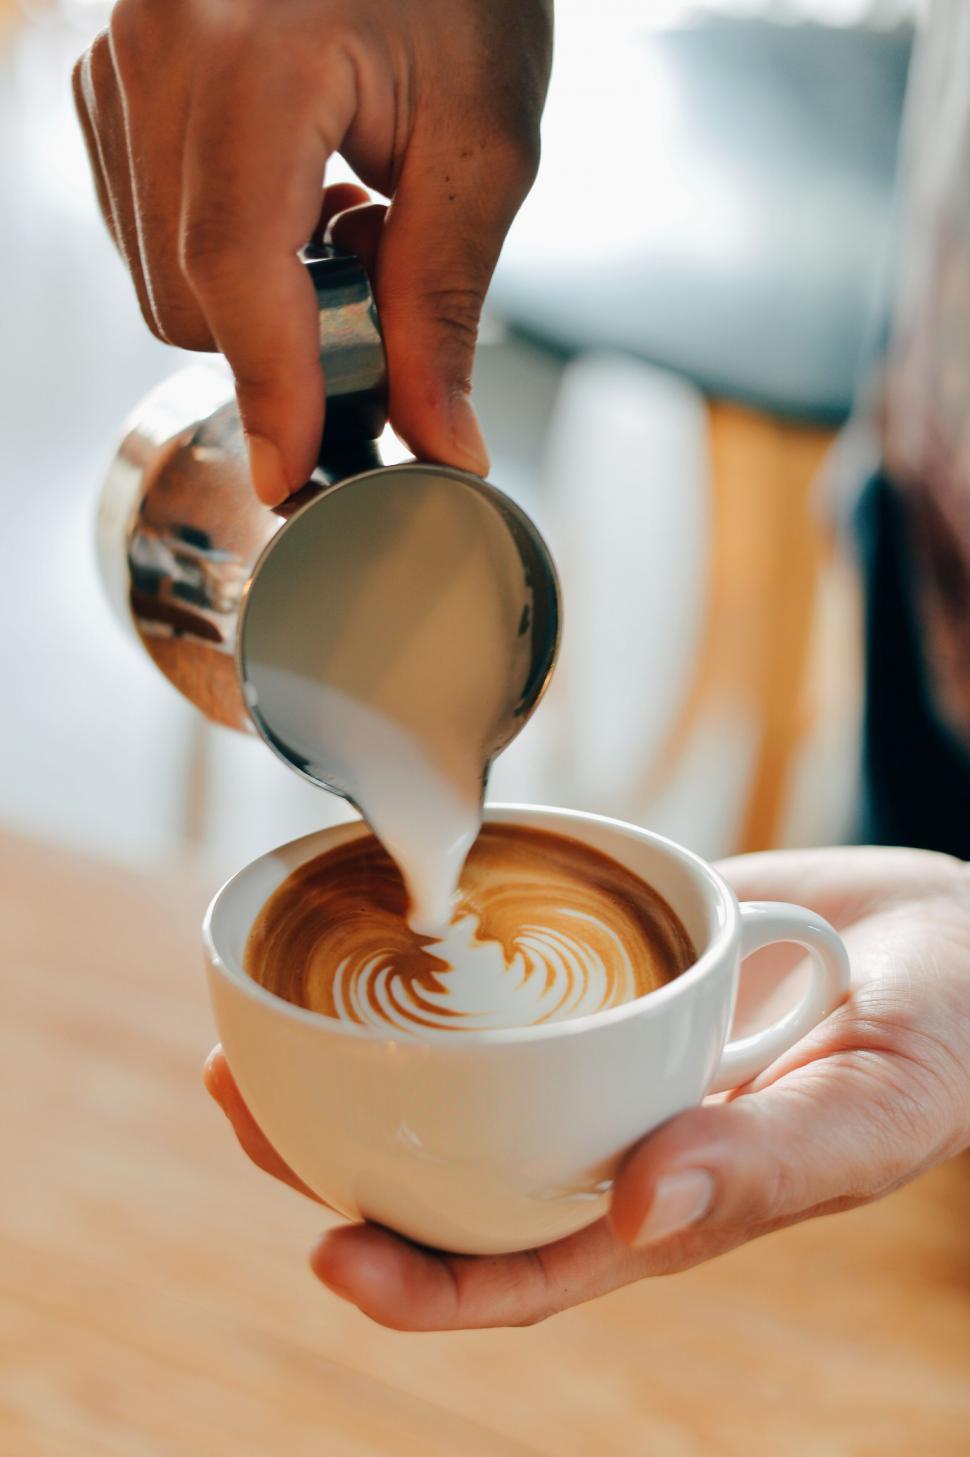 Free Image of A person pouring milk into a cup of coffee 